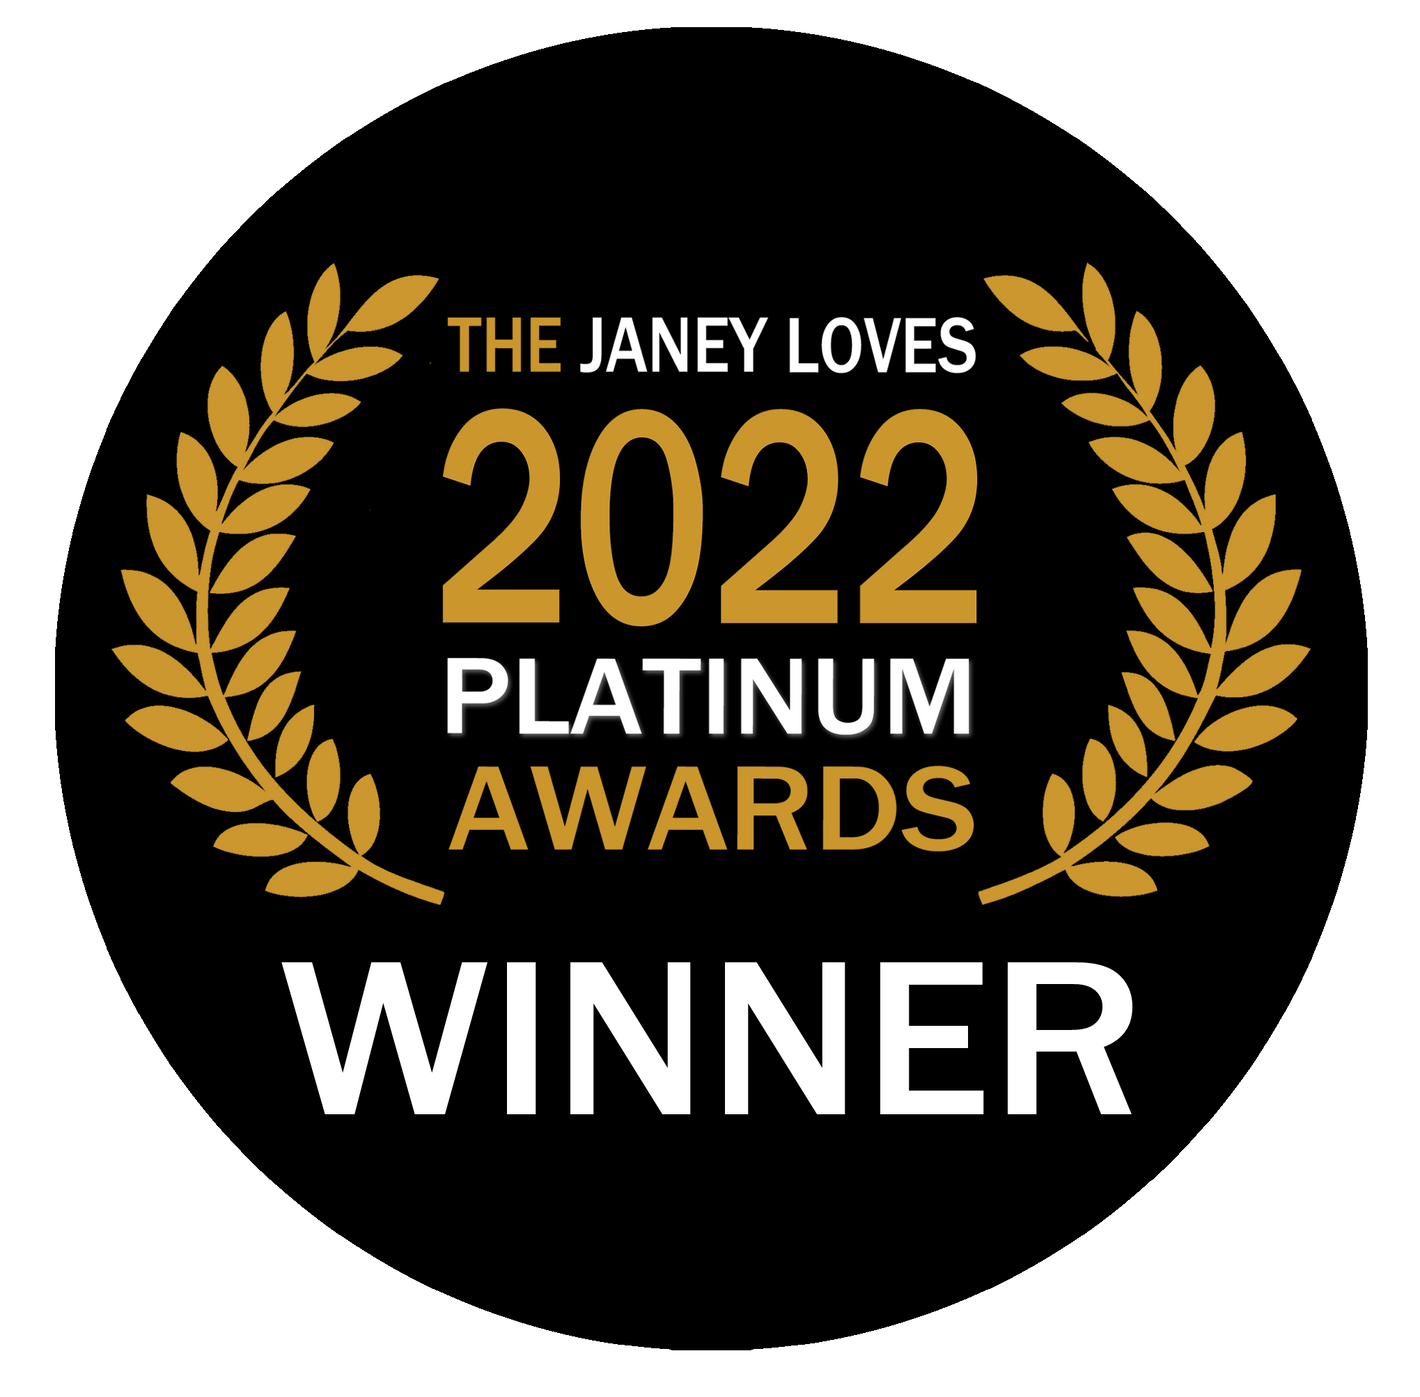 Incognito has been awarded with the Janey Loves Platinum Winner for 2022